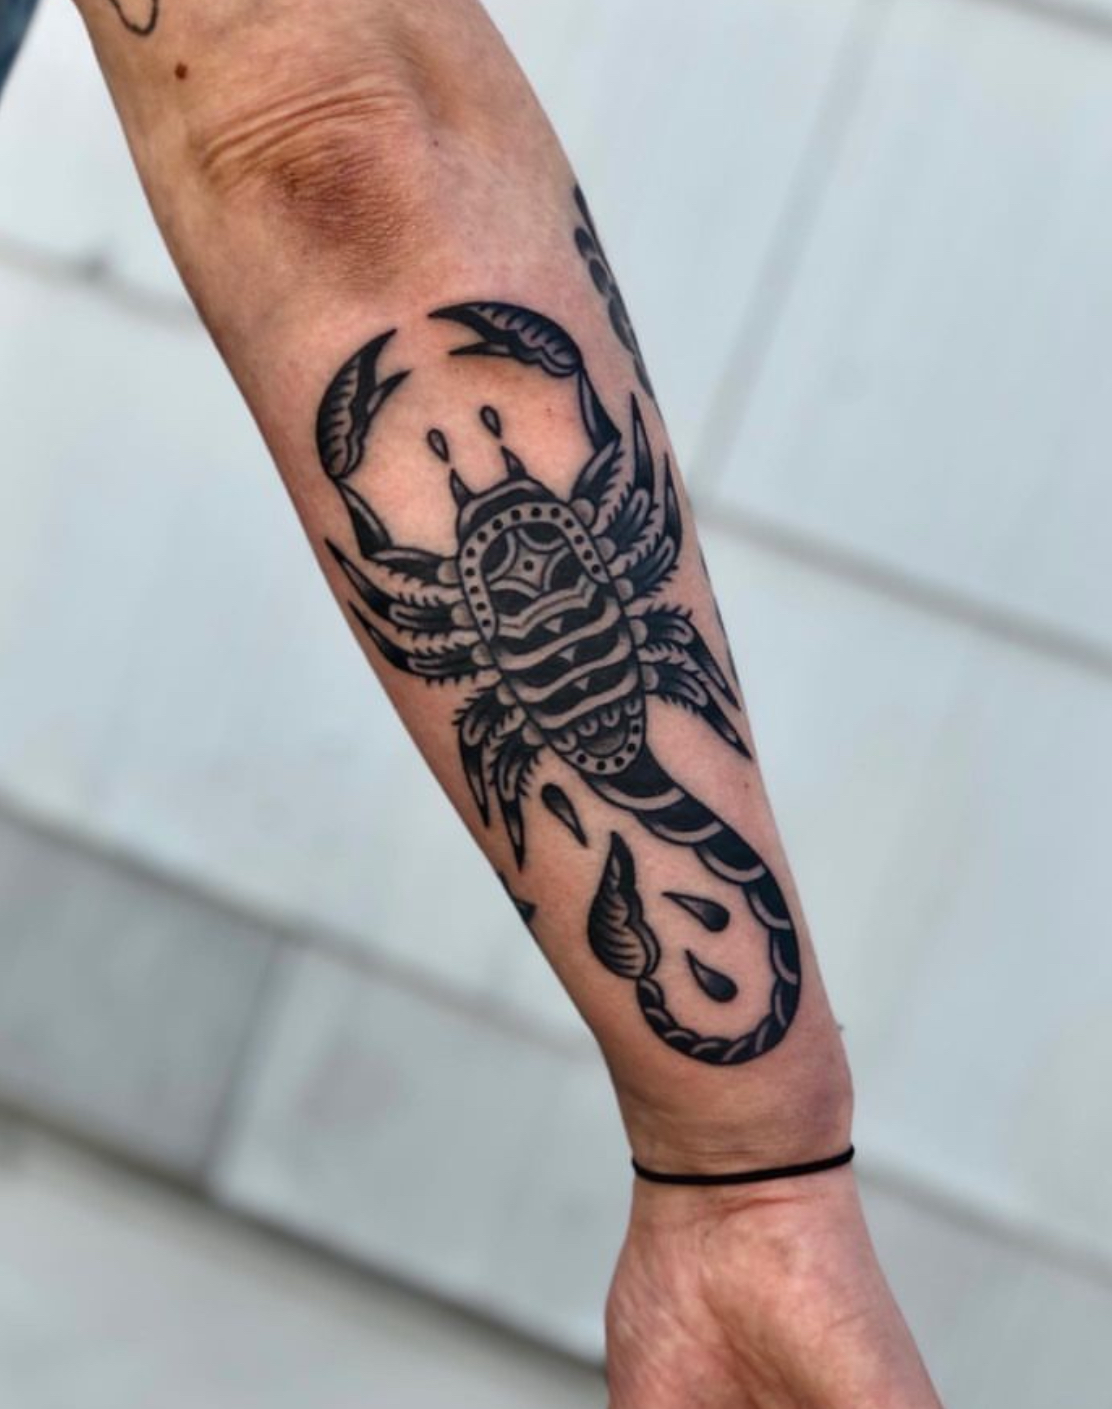 14 Celebrity Scorpion Tattoos | Steal Her Style